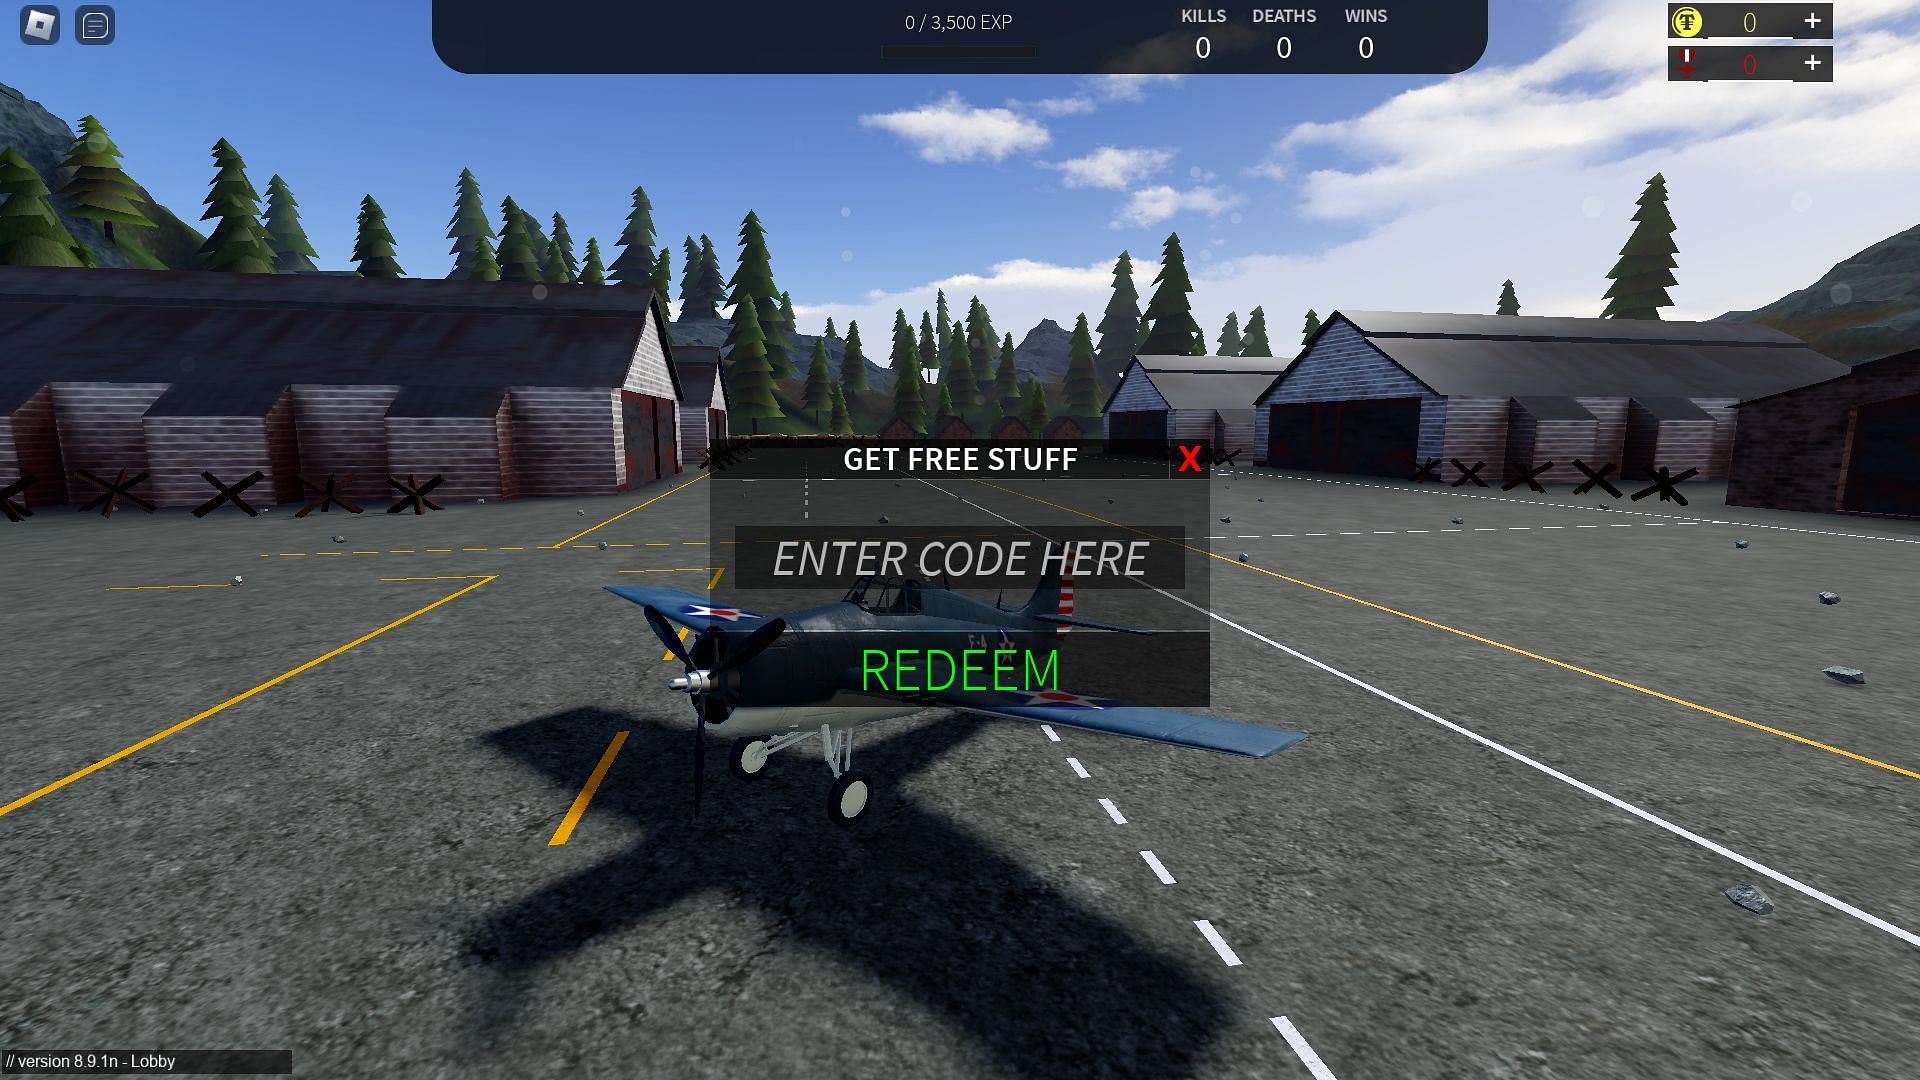 Active codes for Wings of Glory (Image via Roblox)